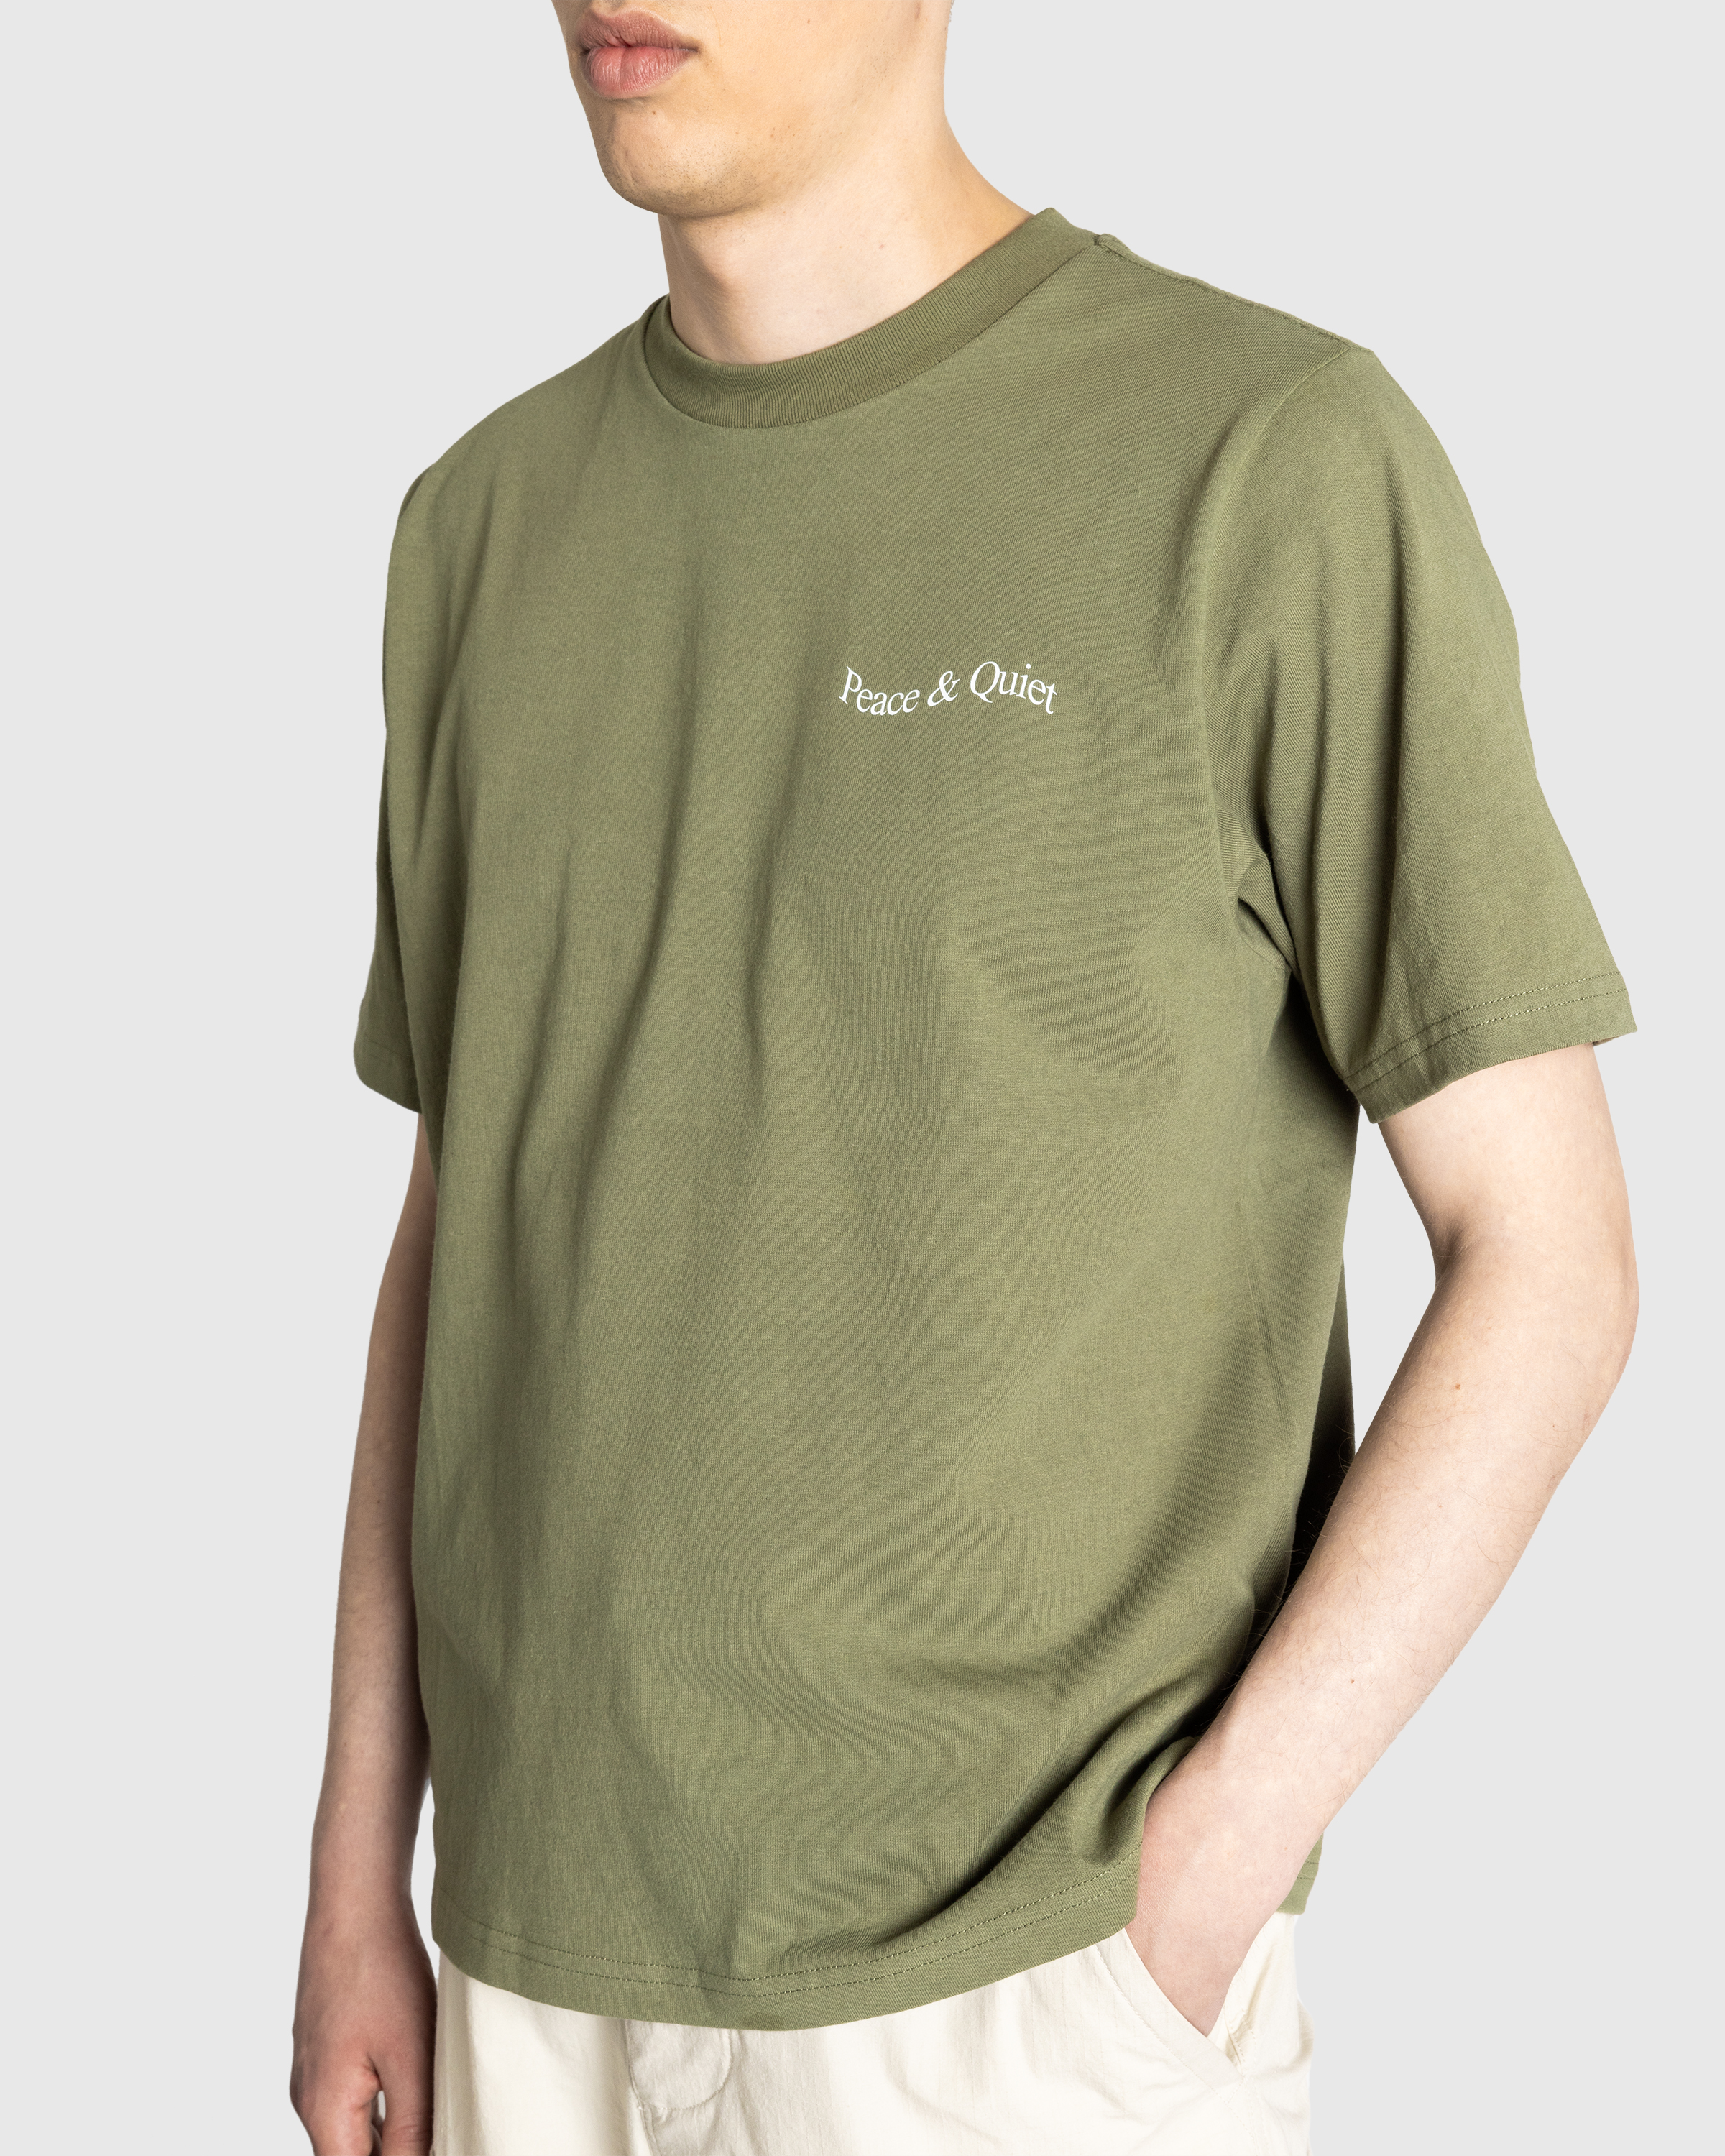 Museum of Peace & Quiet – Wordmark T-Shirt Olive - T-Shirts - Green - Image 5